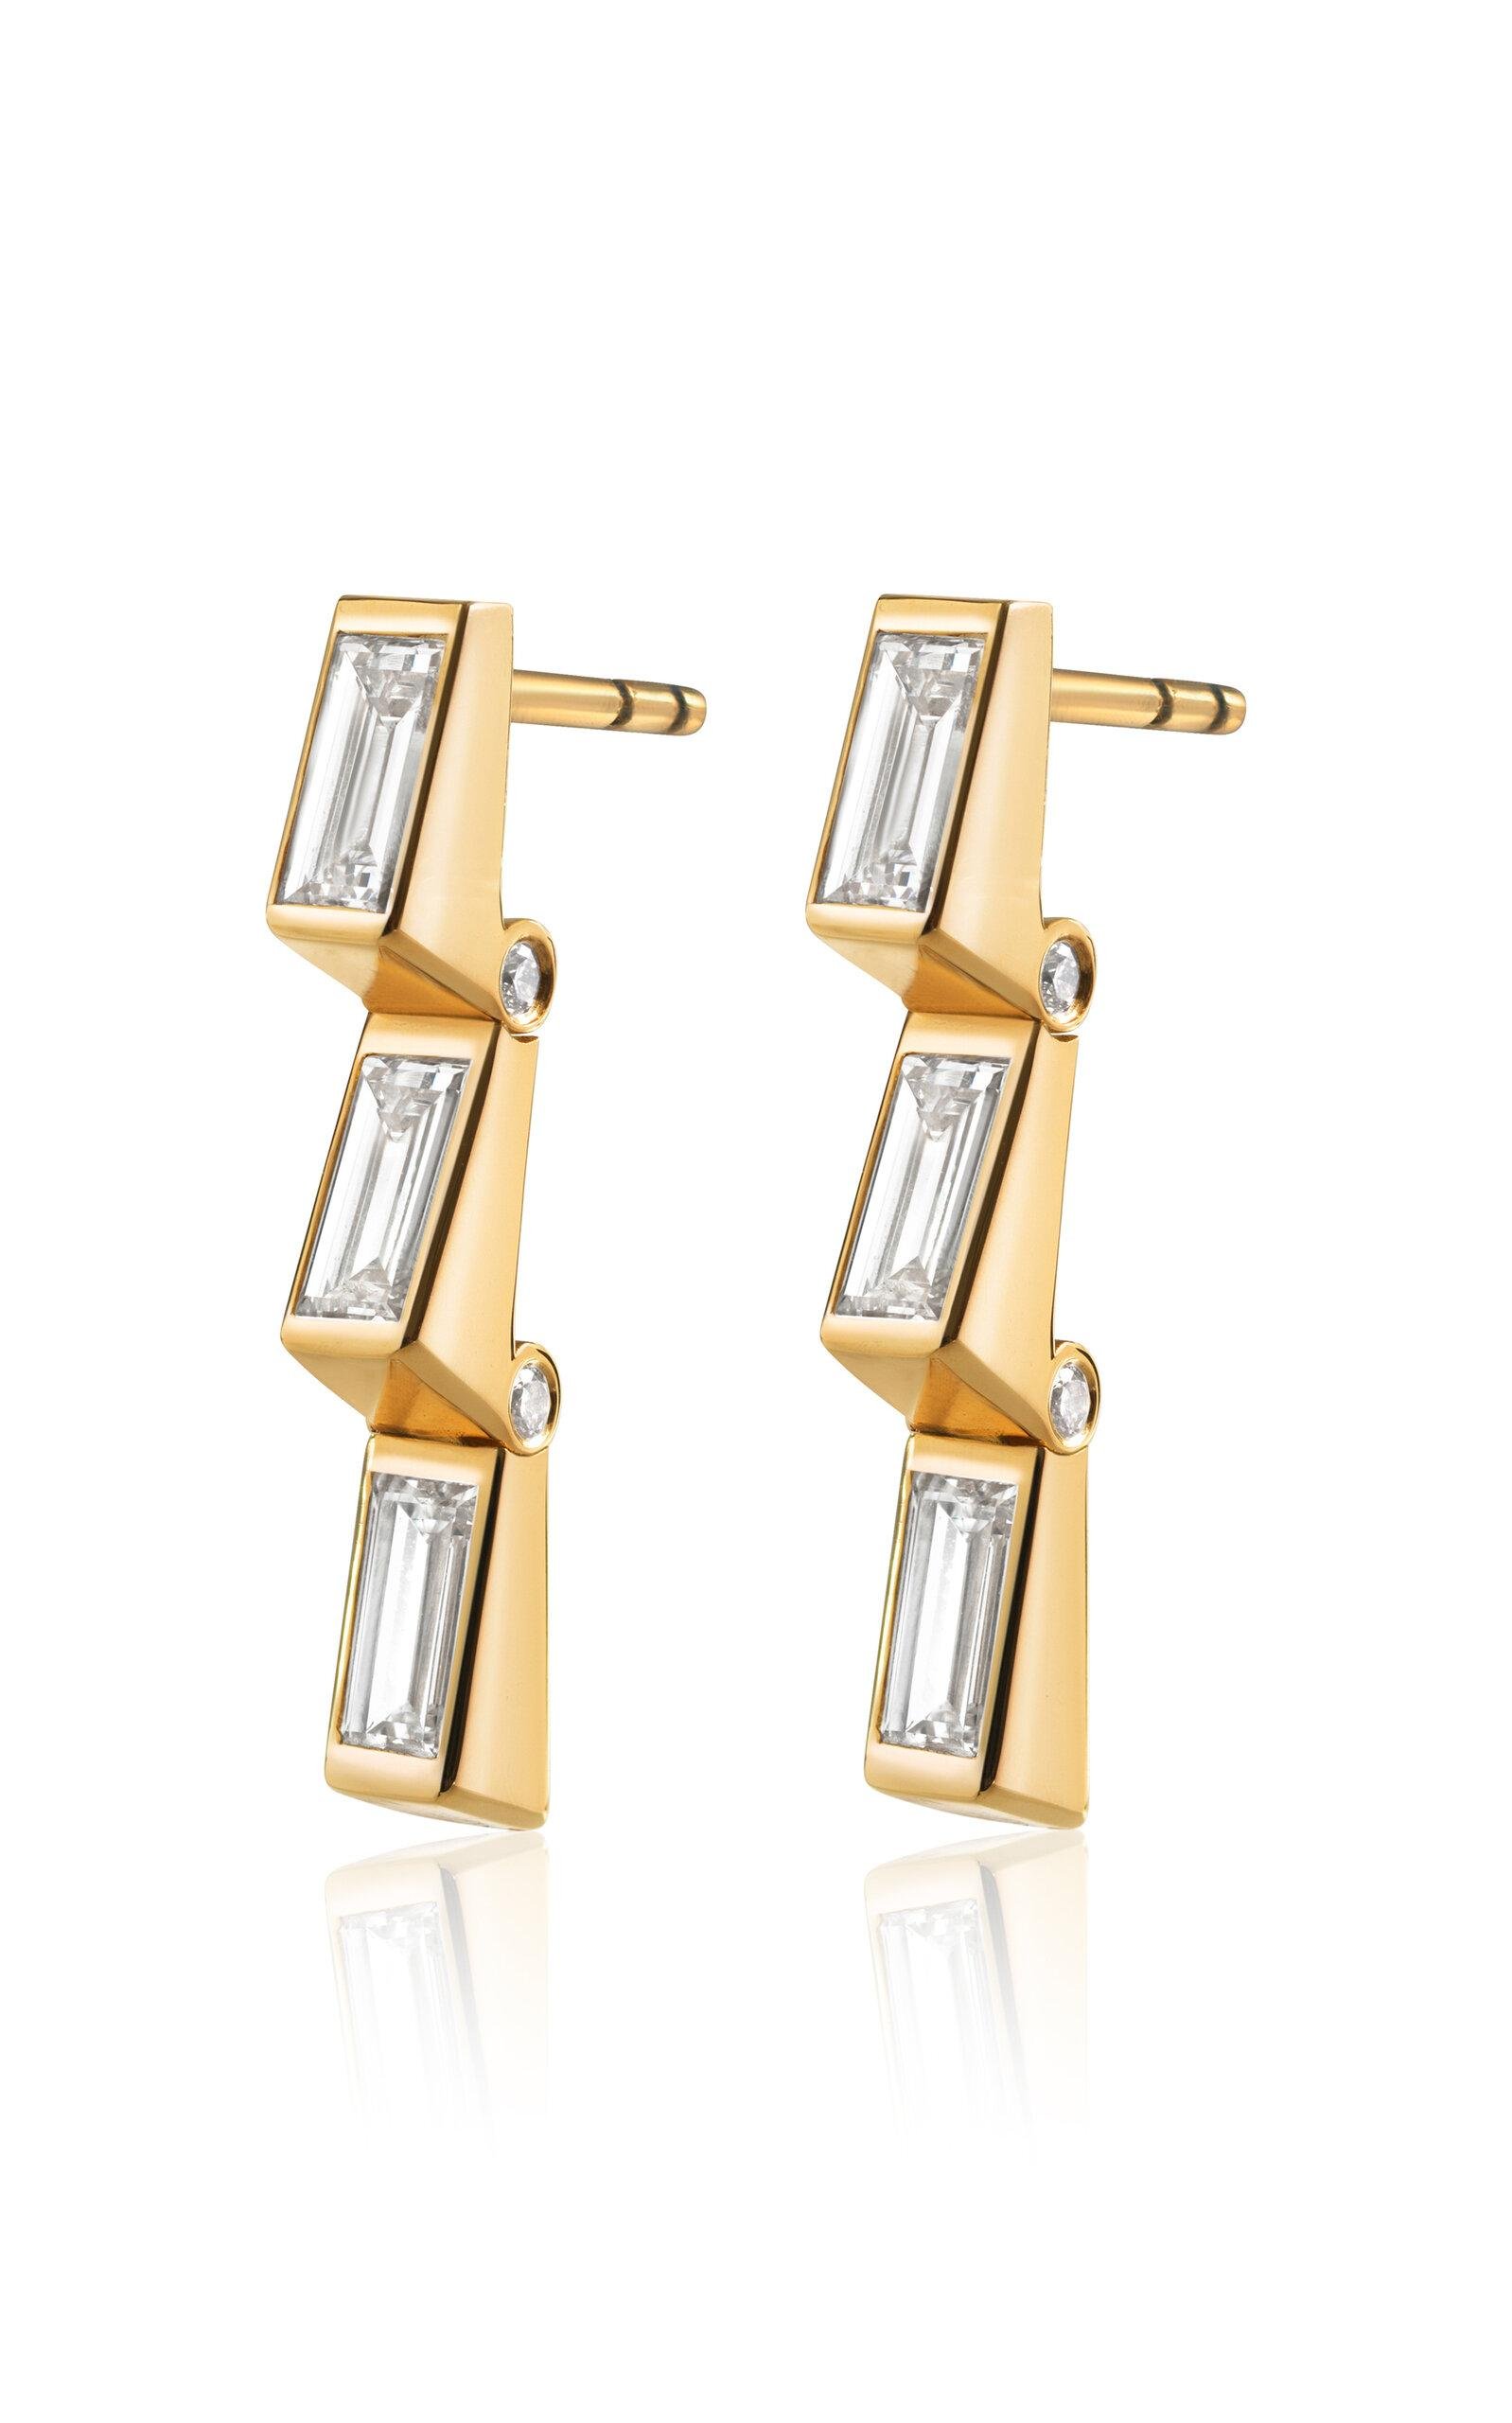 Erede - 18k Yellow Gold Hinged Three Drop Earrings - Gold - OS - Only At Moda Operandi - Gifts For Her by EREDE